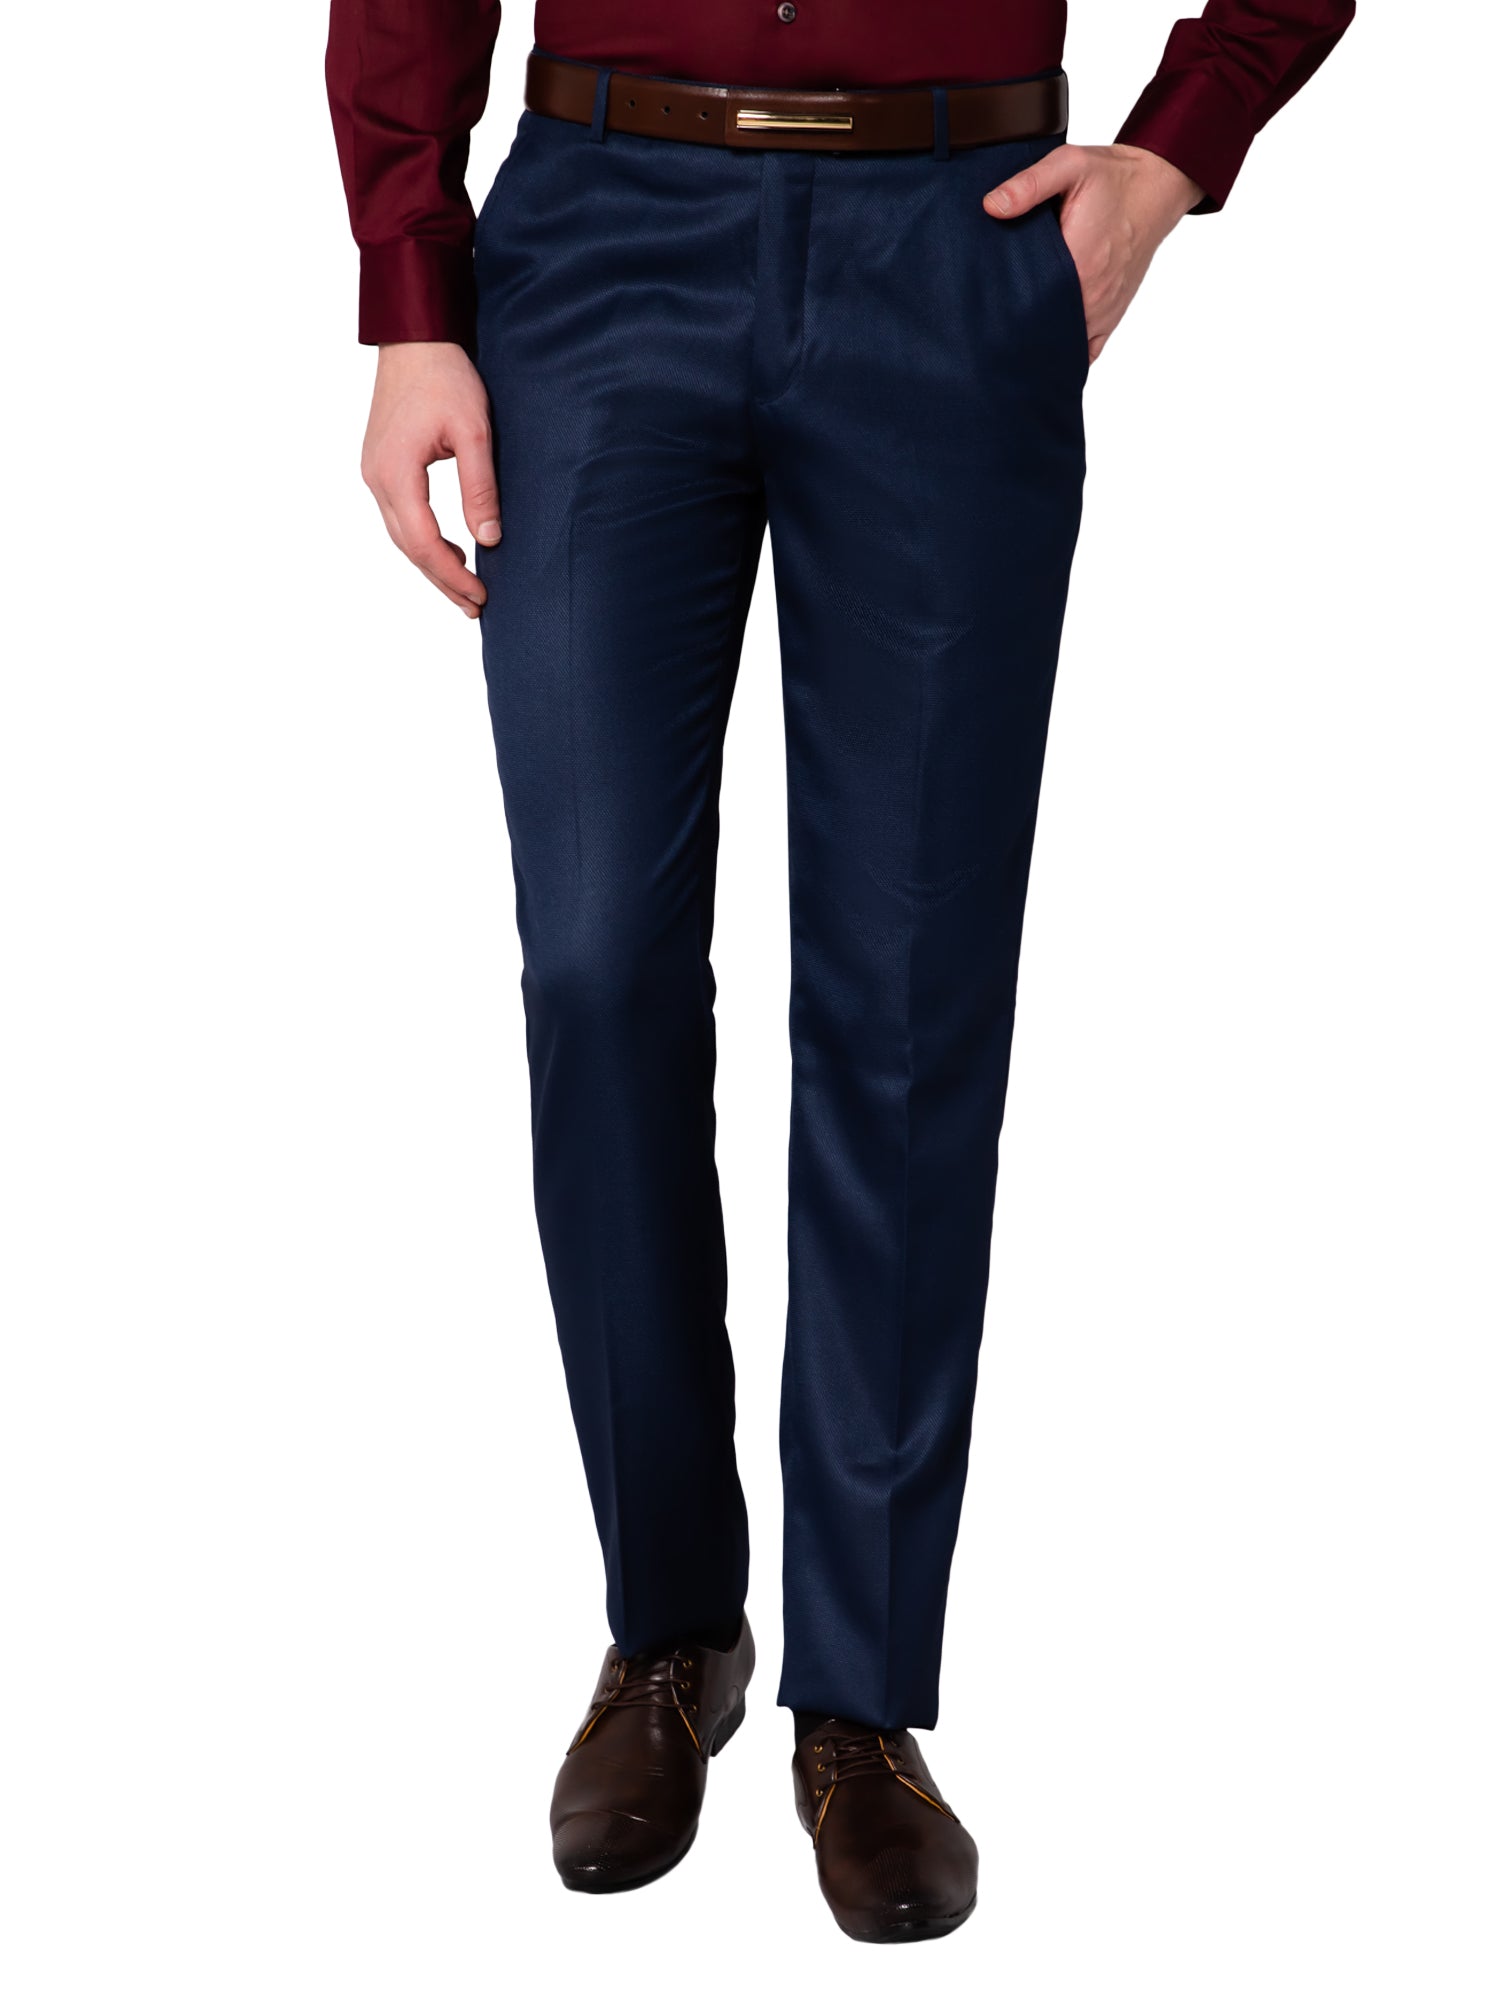 Blue Checked Formal Trouser - Buy Blue Checked Formal Trouser online in  India